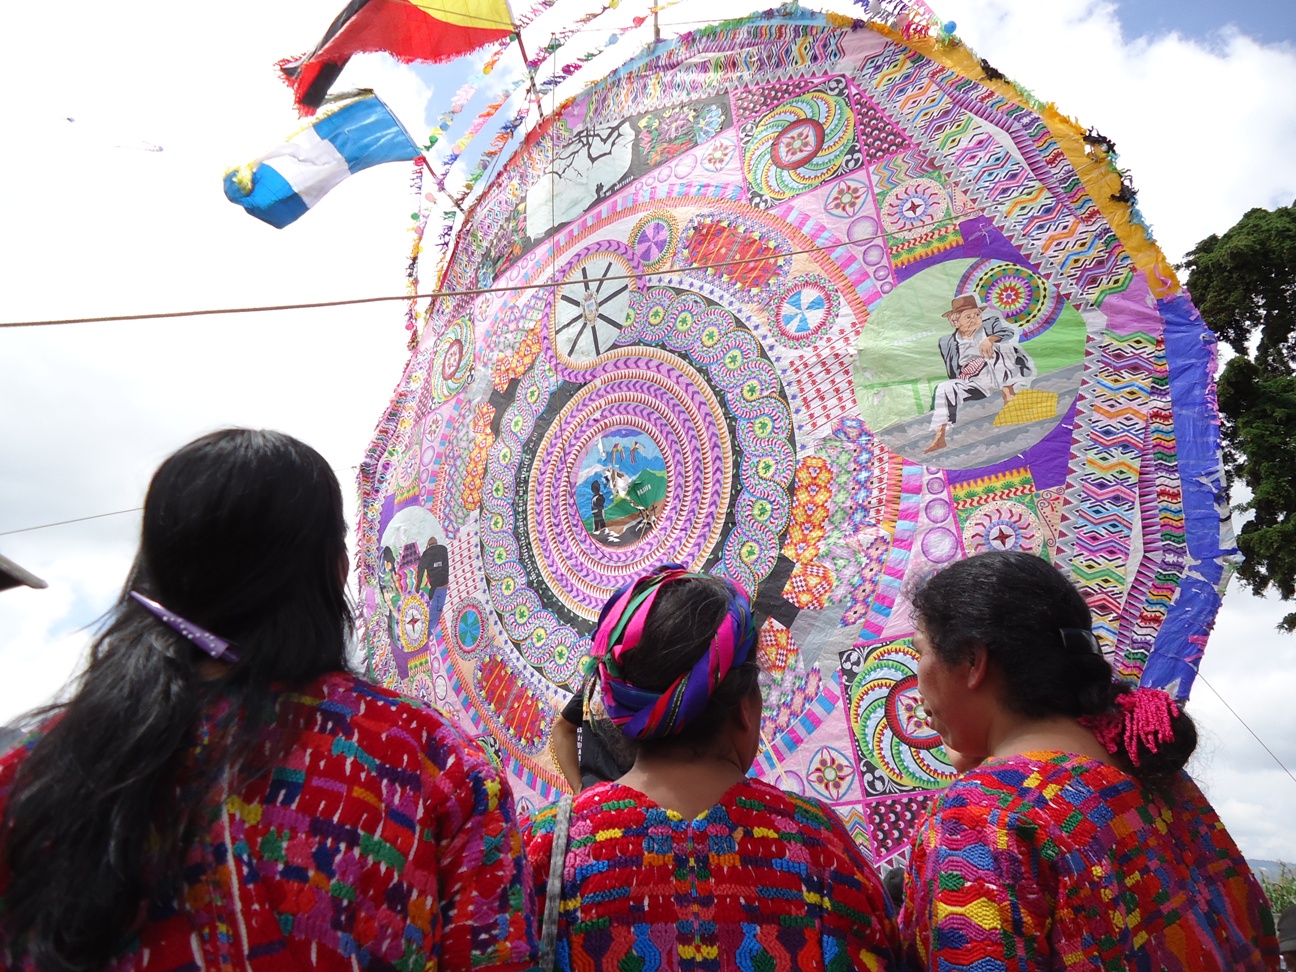 Giant kites on day of the Dead in Sumpango.